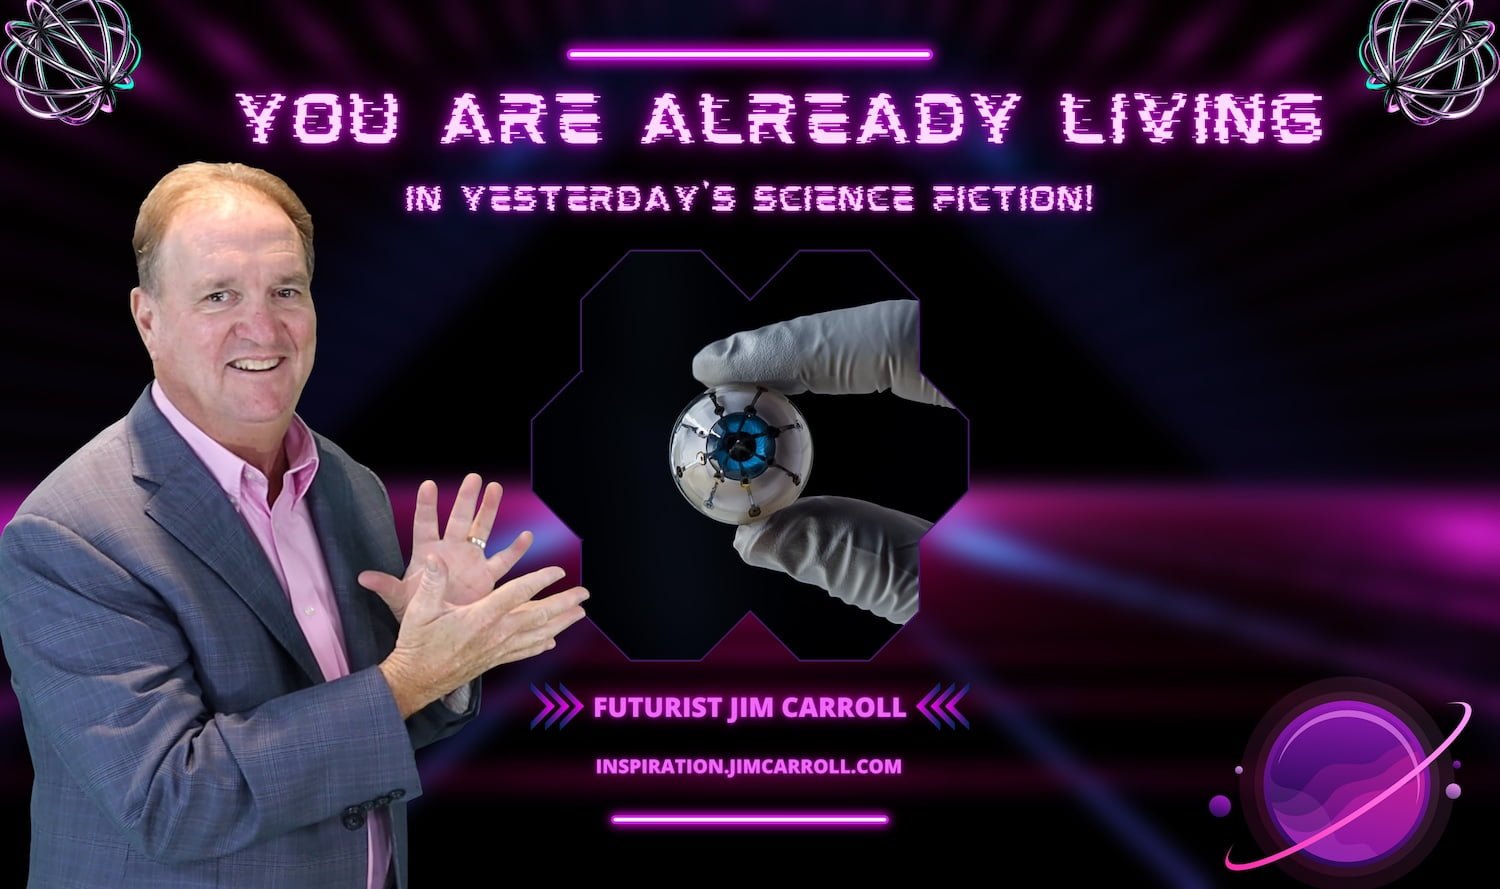 Daily Inspiration: "You are already living in yesterday's science fiction!"